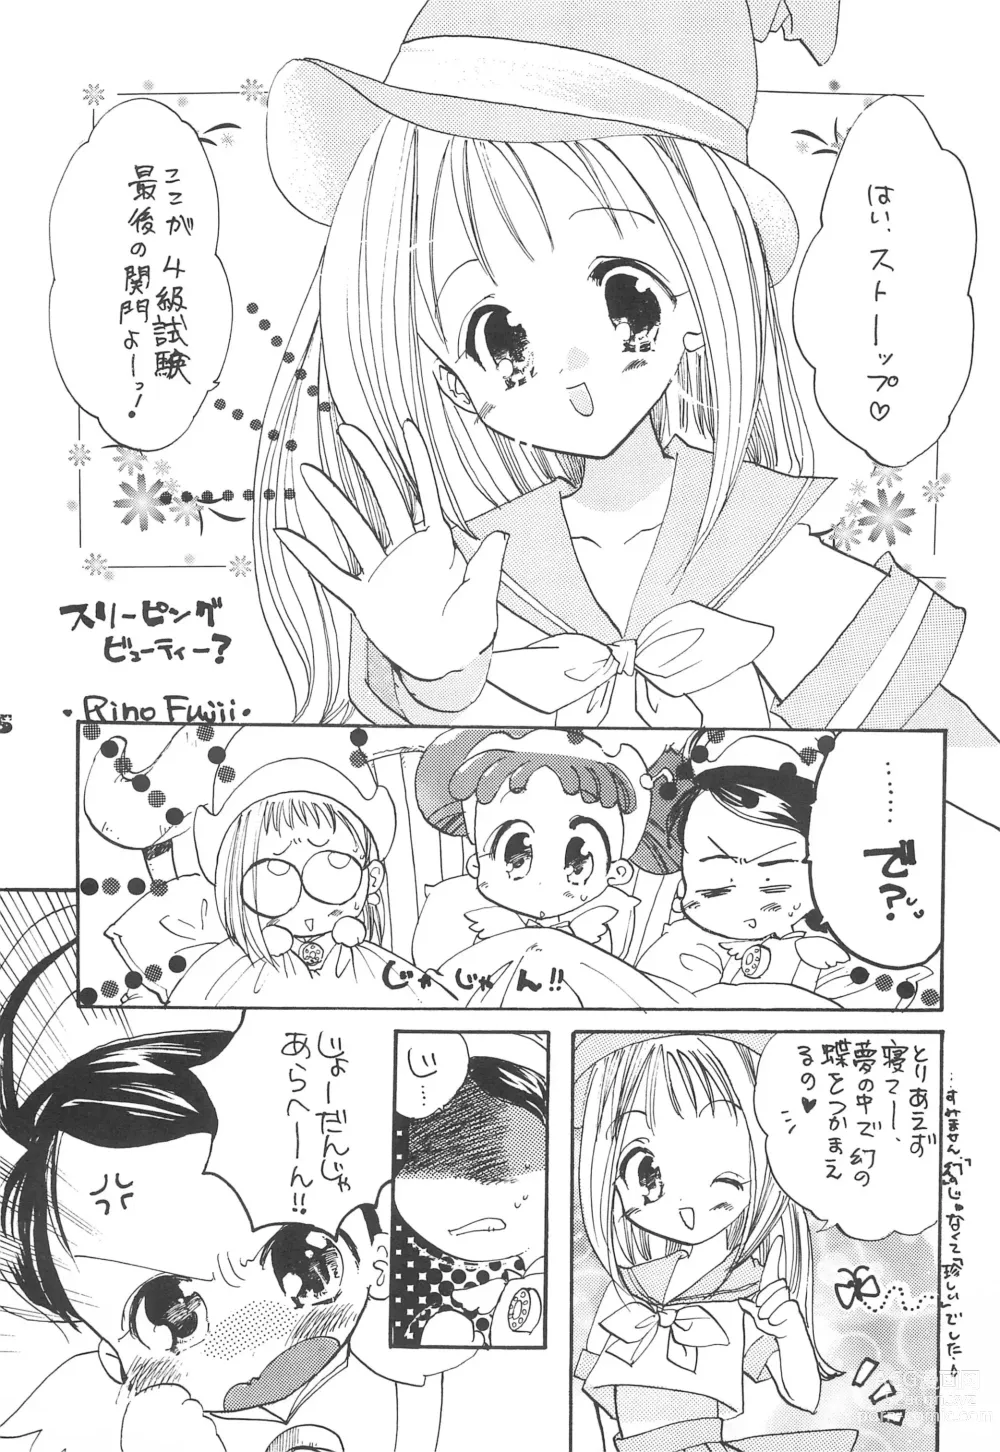 Page 7 of doujinshi Twinkle Melody